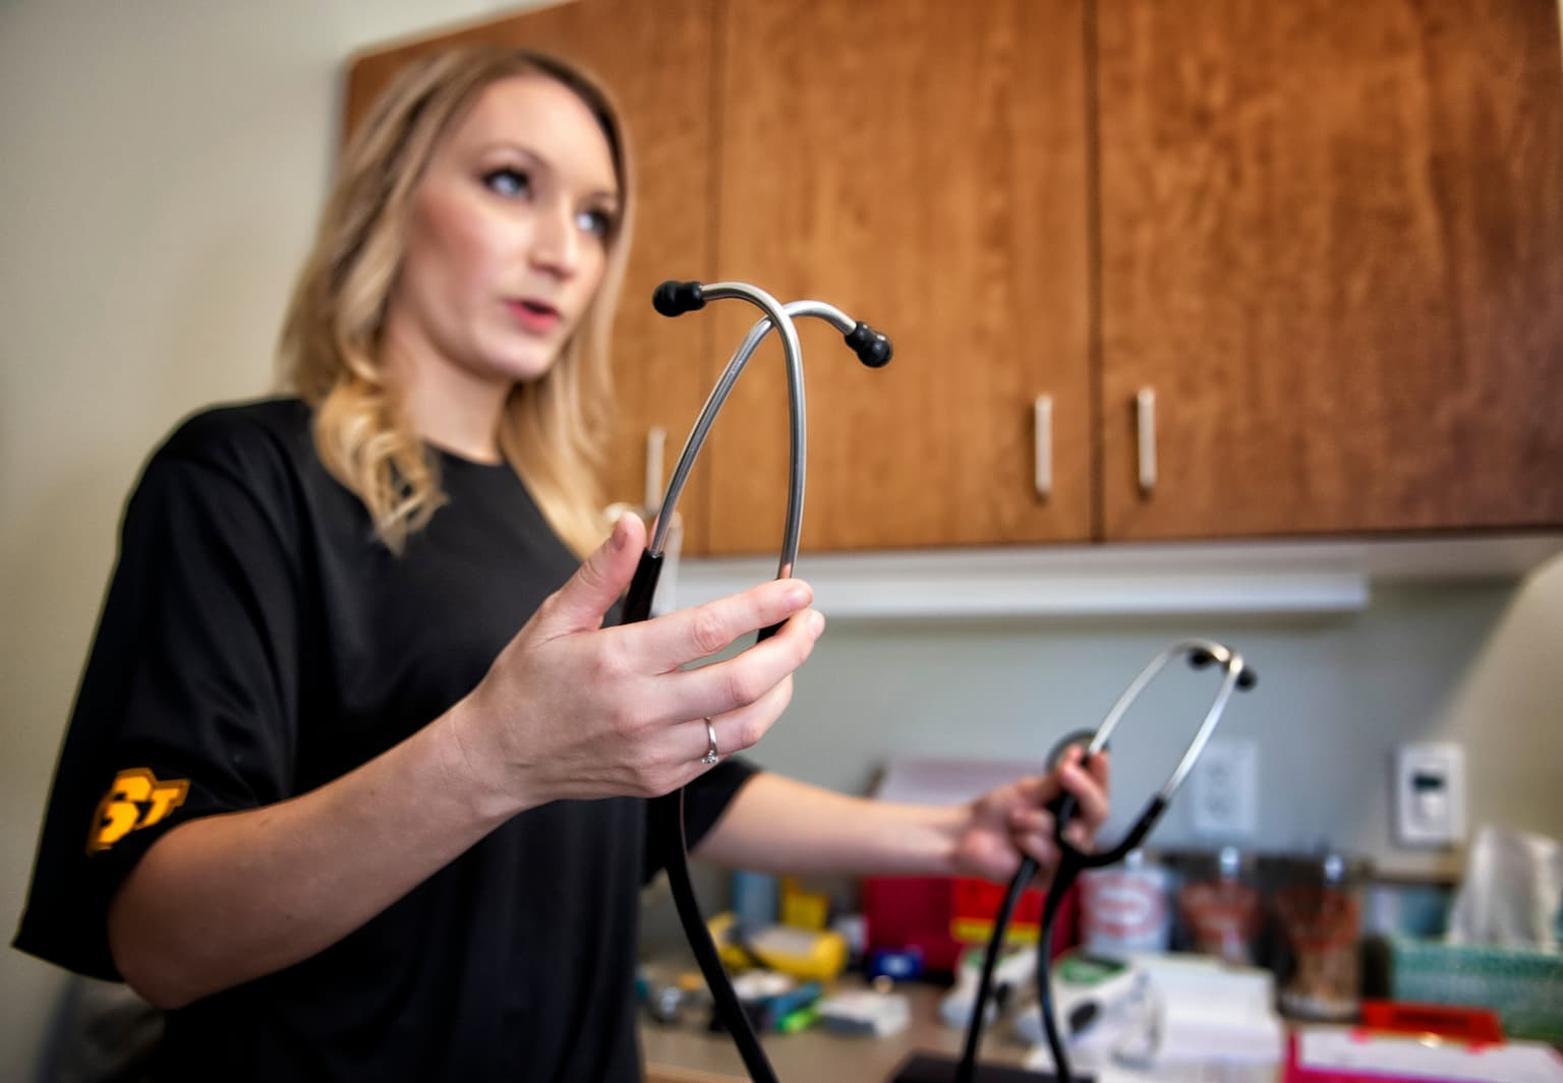 CNA student holding a stethoscope